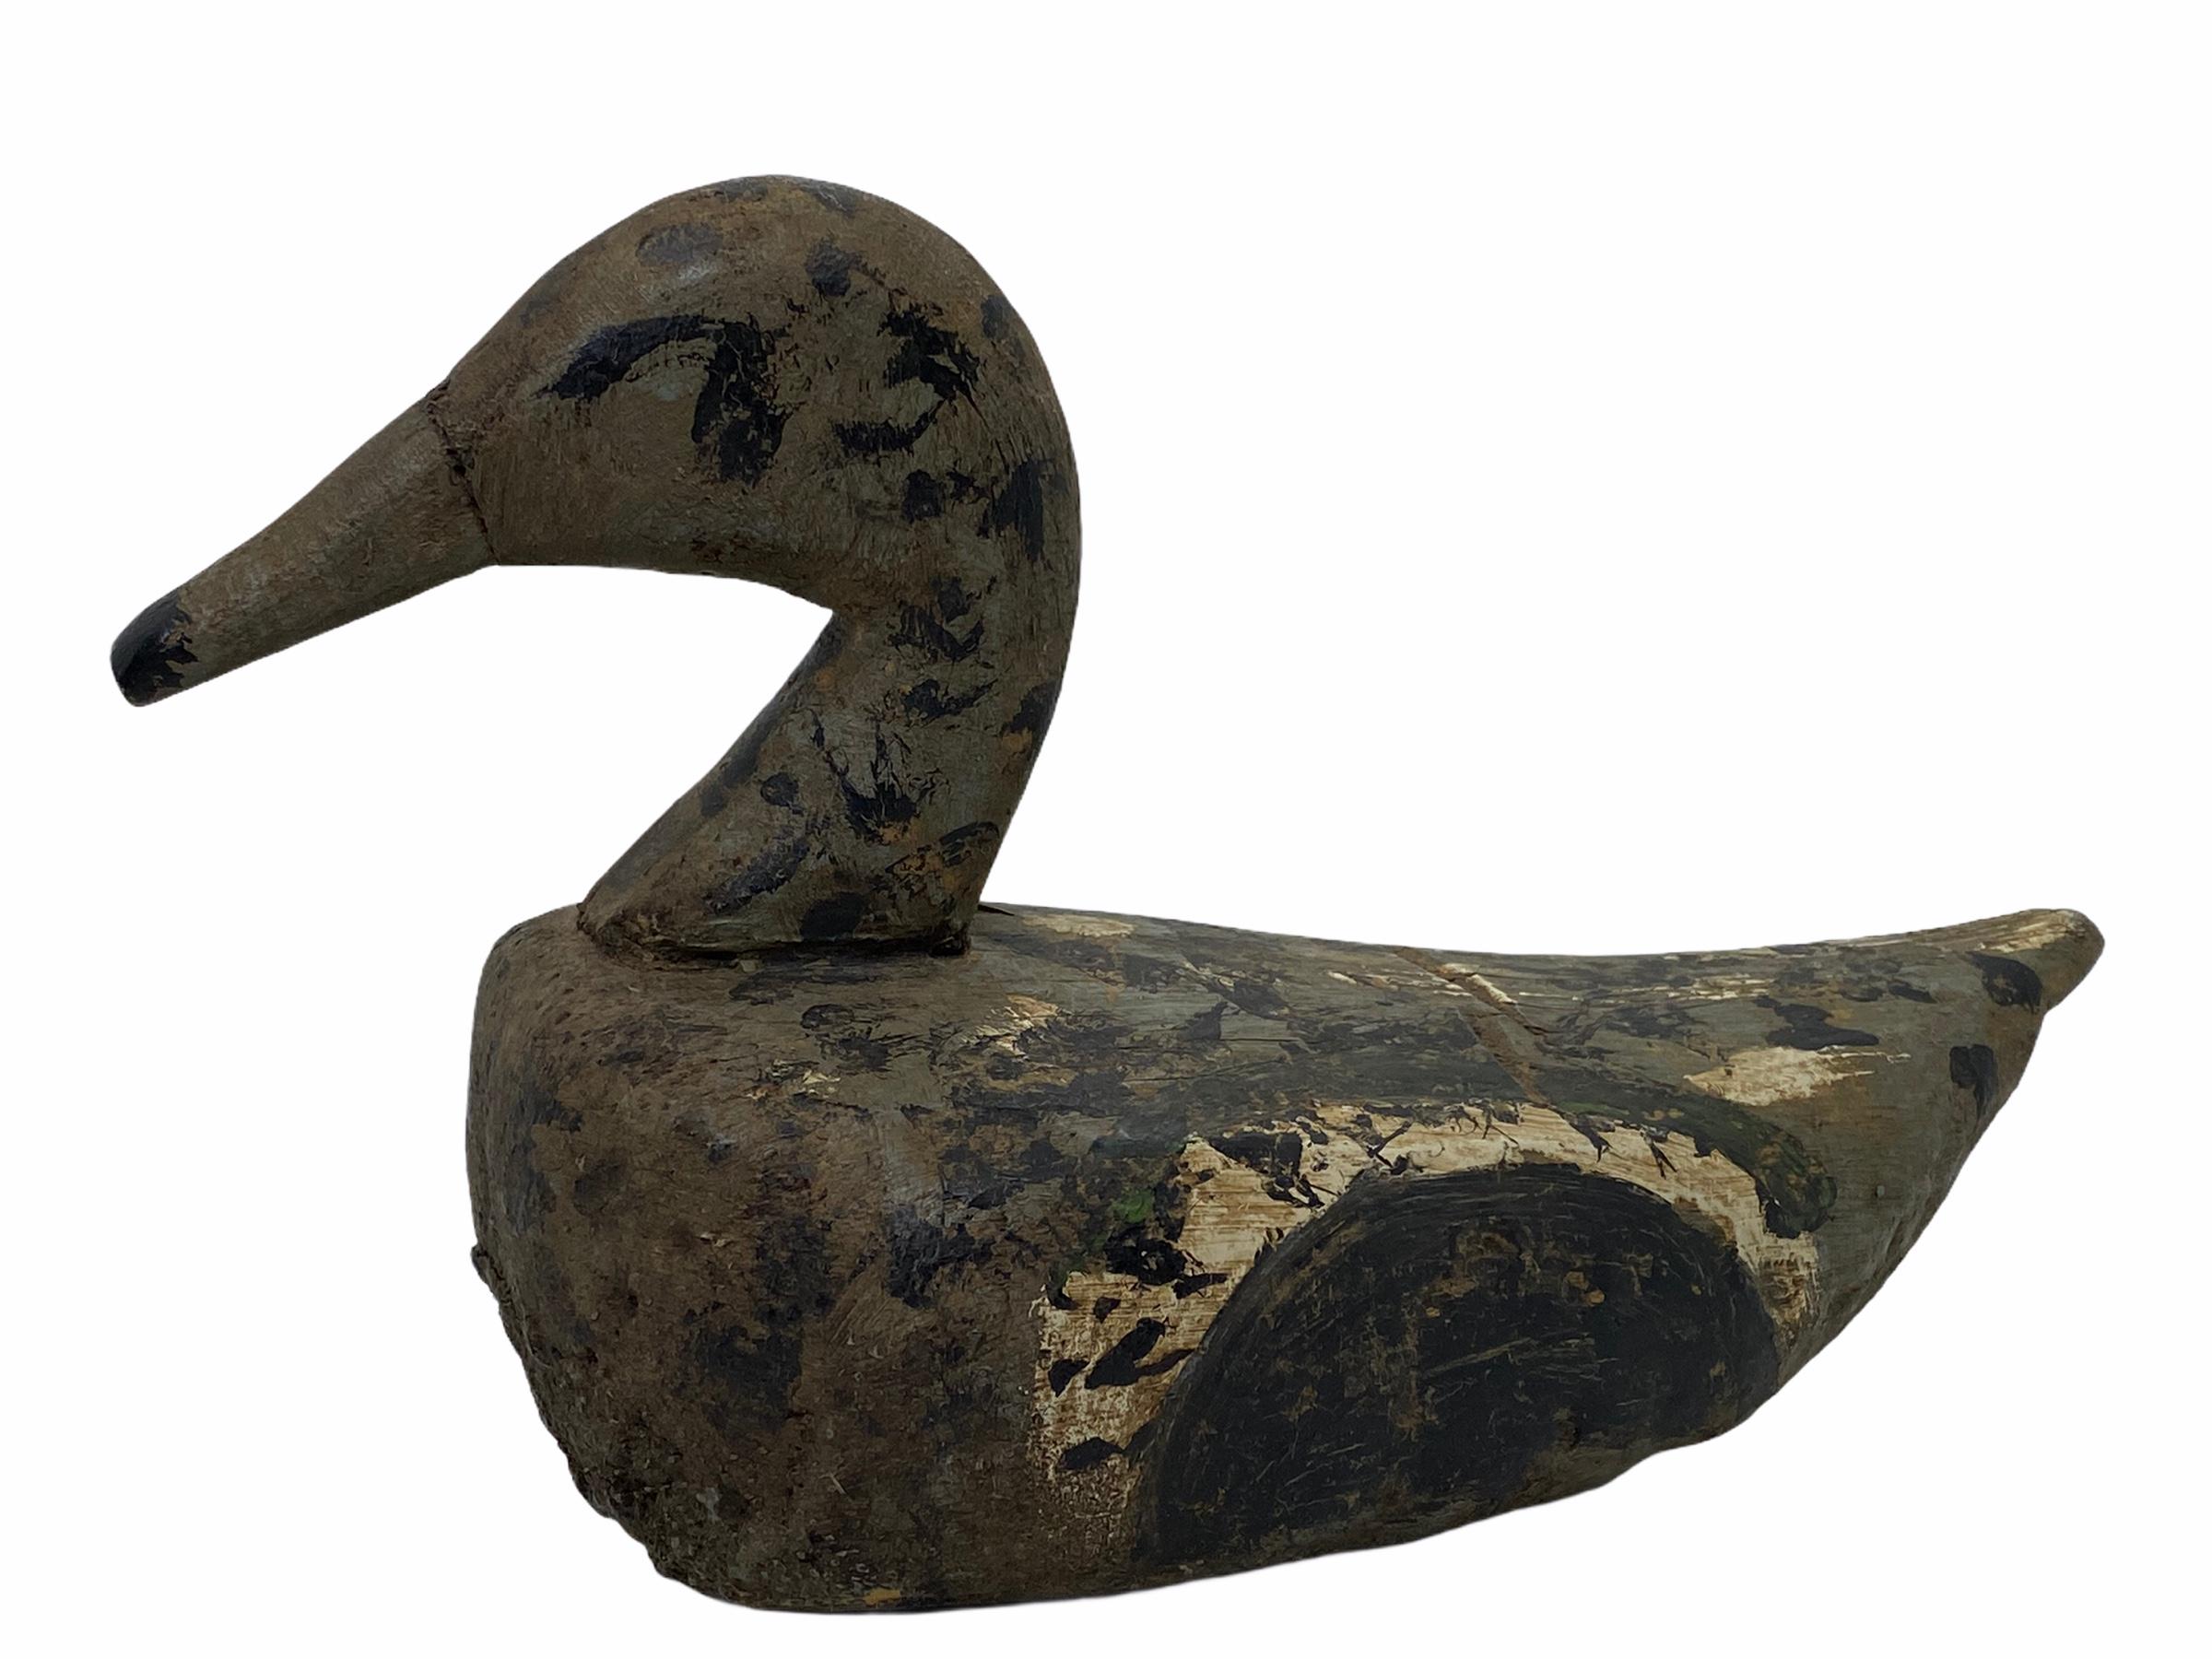 Found in Germany at an estate sale, this hand carved and hand painted duck decoy is perfect for the collector. Well used by a previous hunter the paint has faded through time although the original detail can be seen and admired. Nice Folk Art